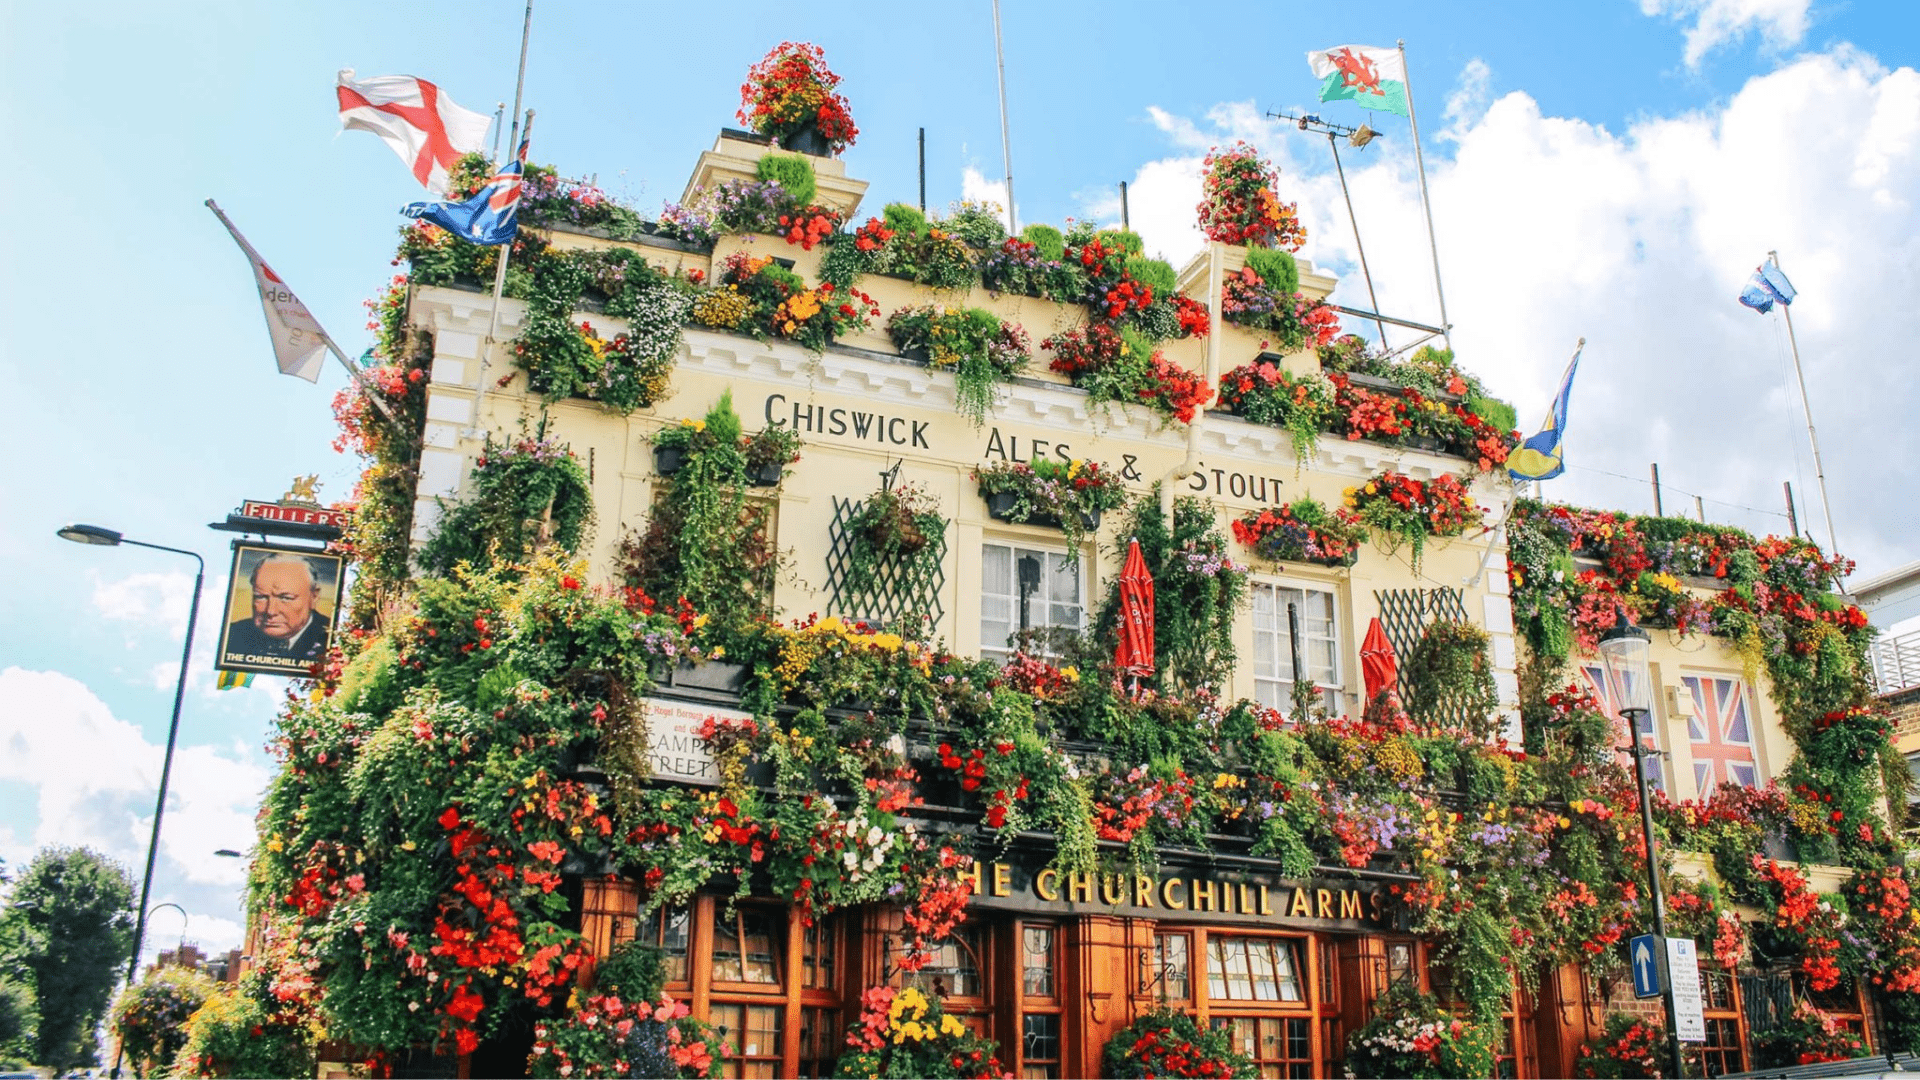 SCL-International-College-The-Top-5-Most-Instagrammable-Places-in-London-The-Churchill-Arms